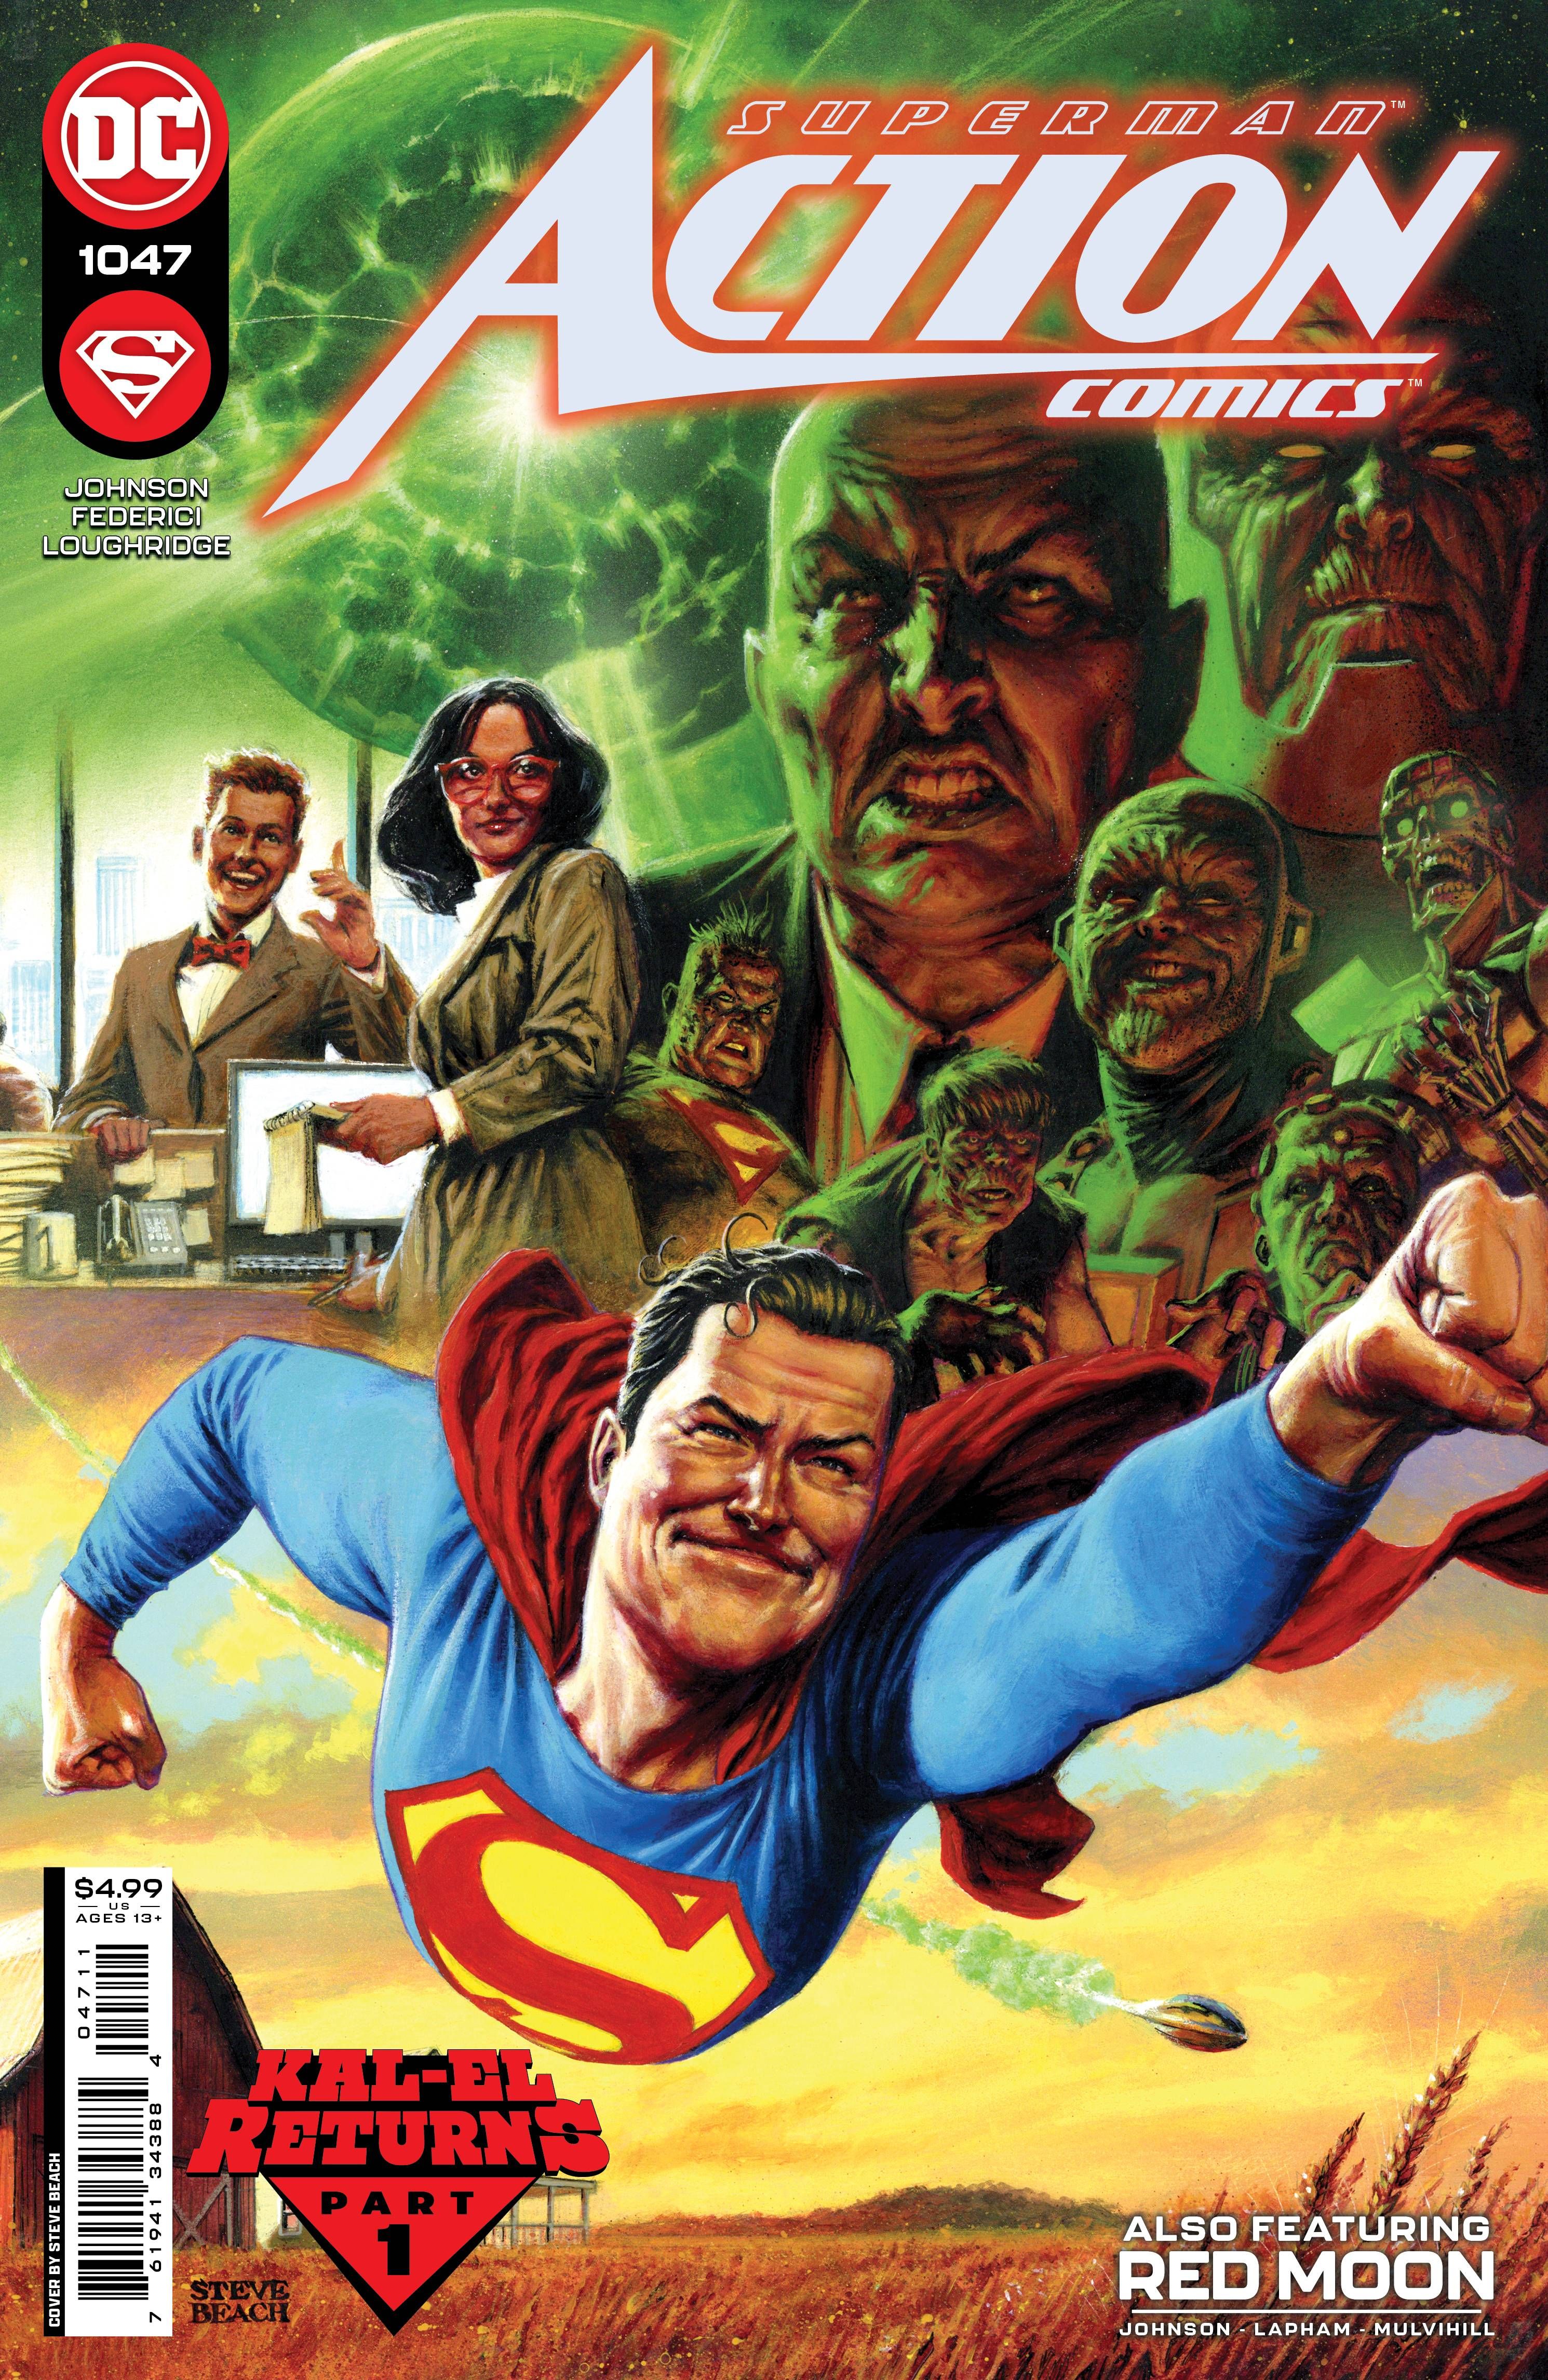 Action Comics #1047 cover